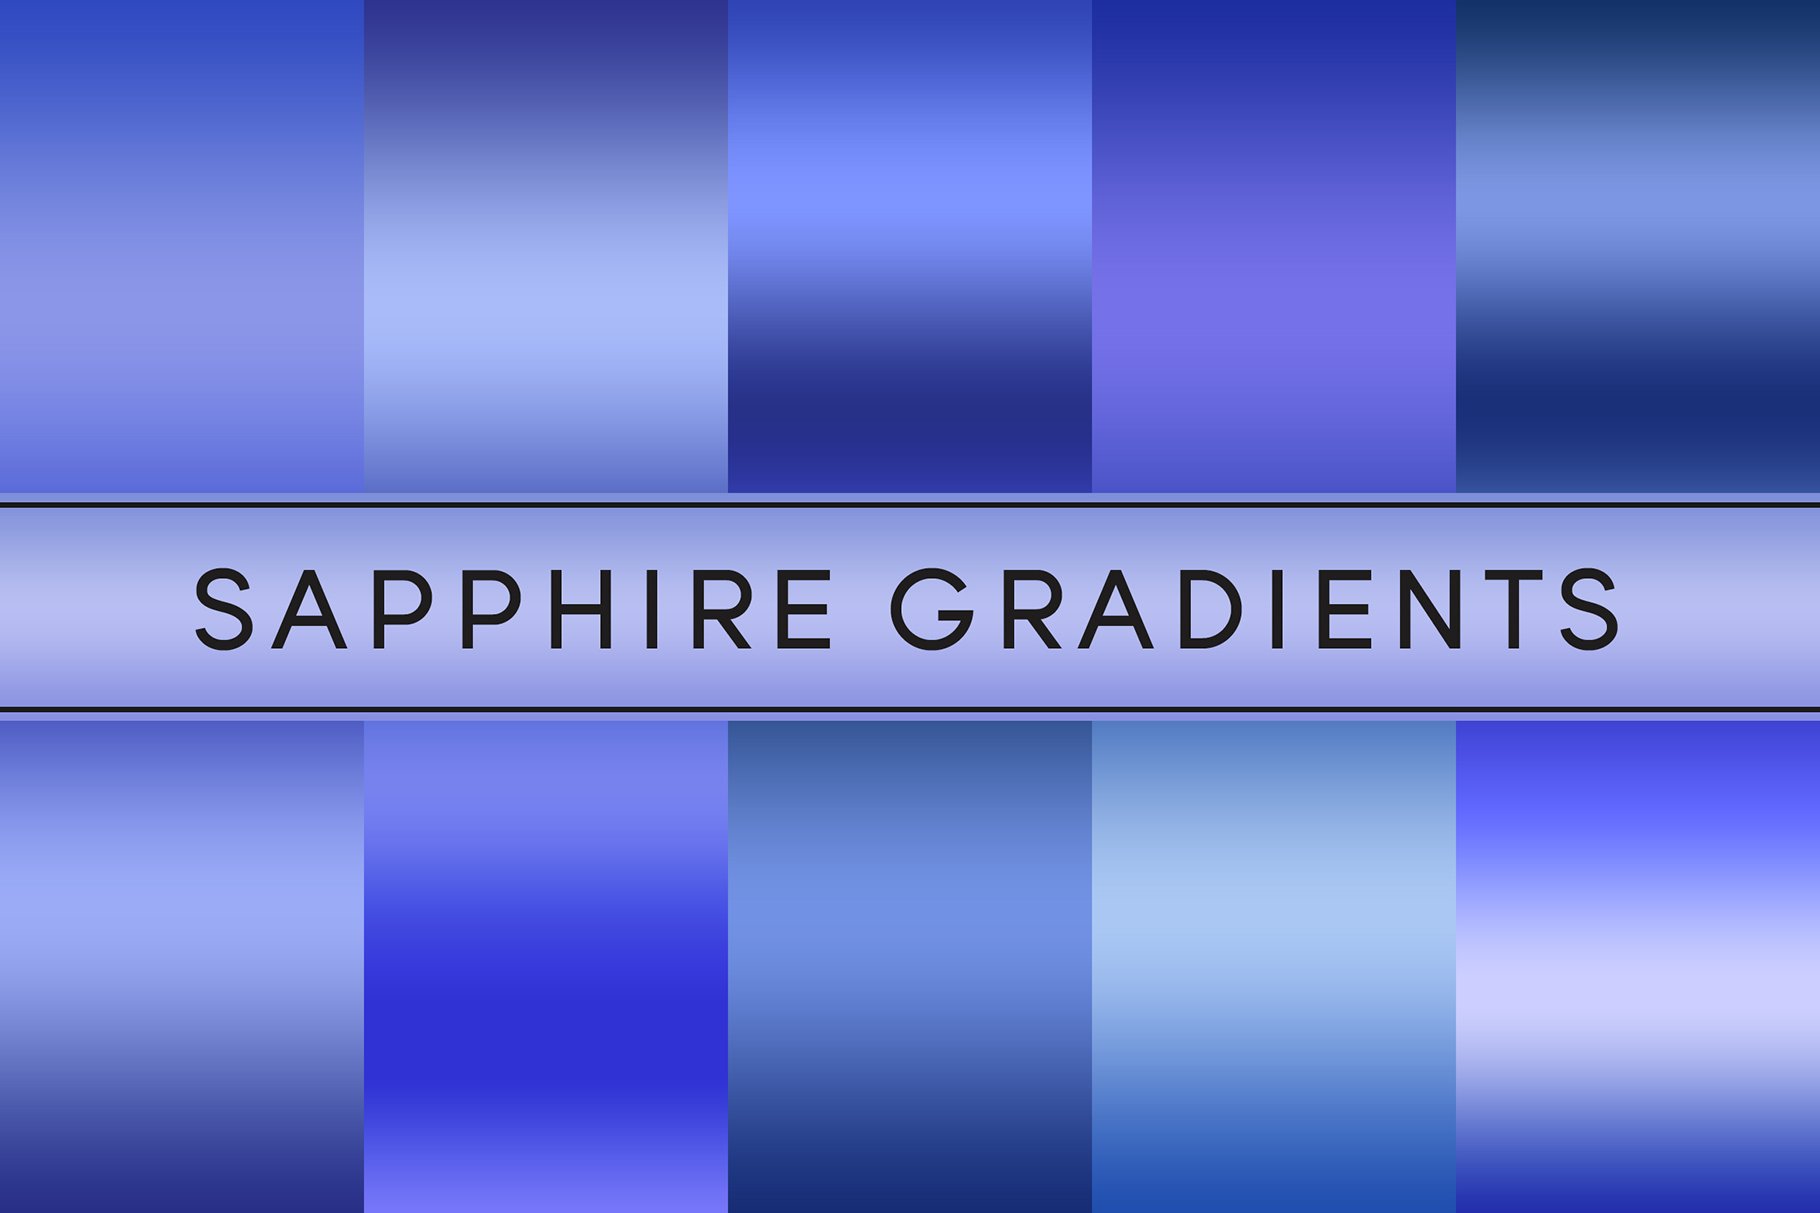 Sapphire Gradientscover image.